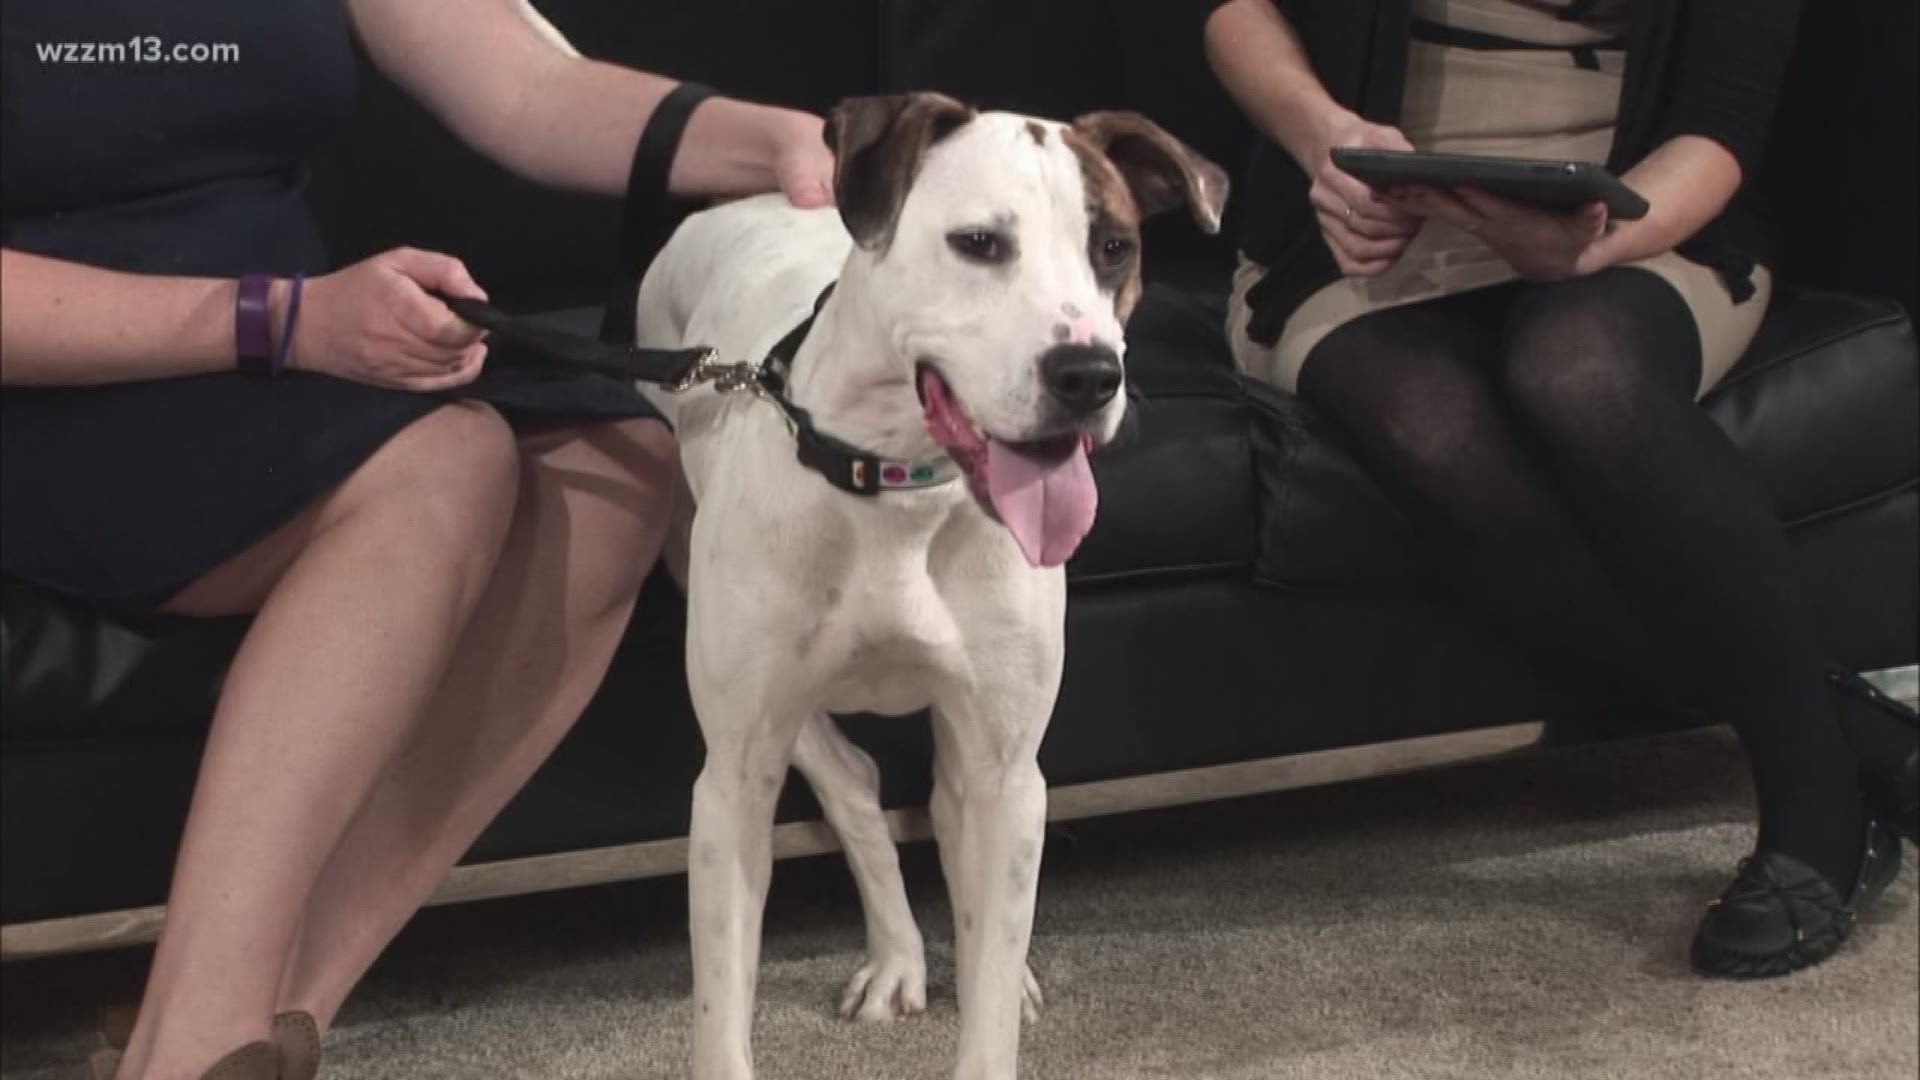 Looking for a special friend? Adopt Fifth from the Humane Society of West Michigan. He's a very energetic 1-year-old Boxer mix, so he's looking for an active family.